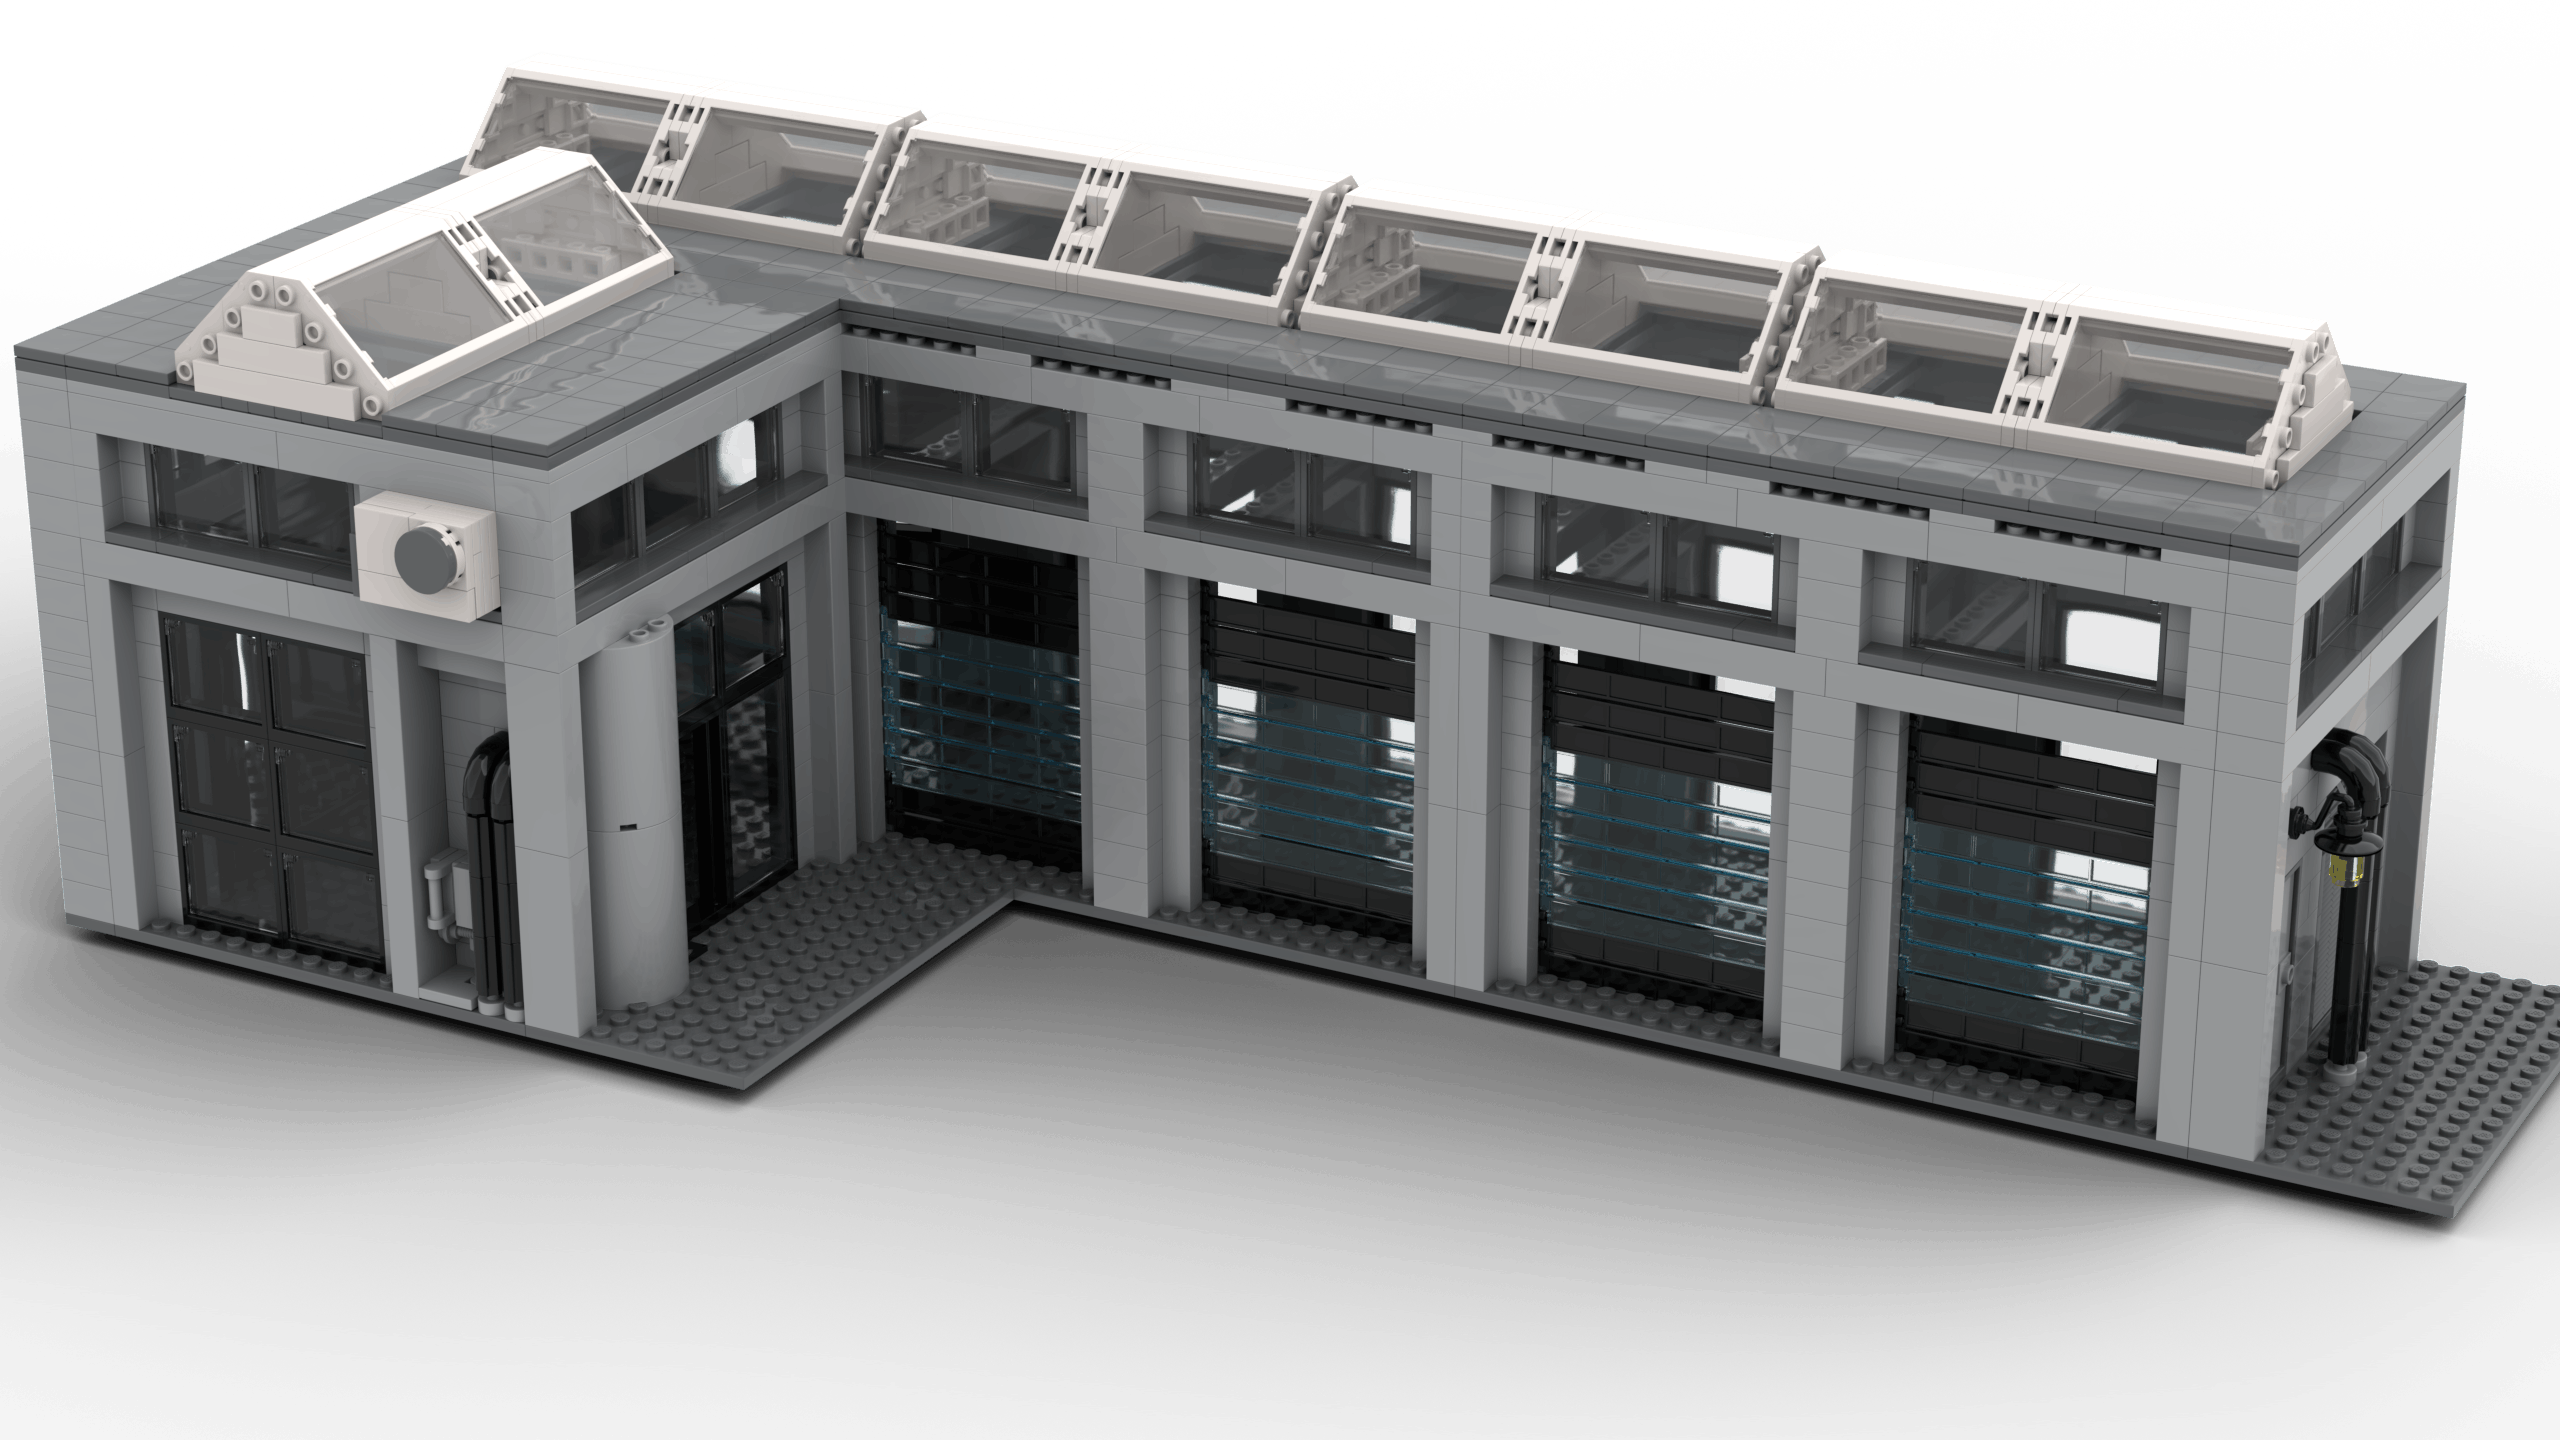 3D render of the Logistics Terminal MOC not final design. Rendered using Stud.io.